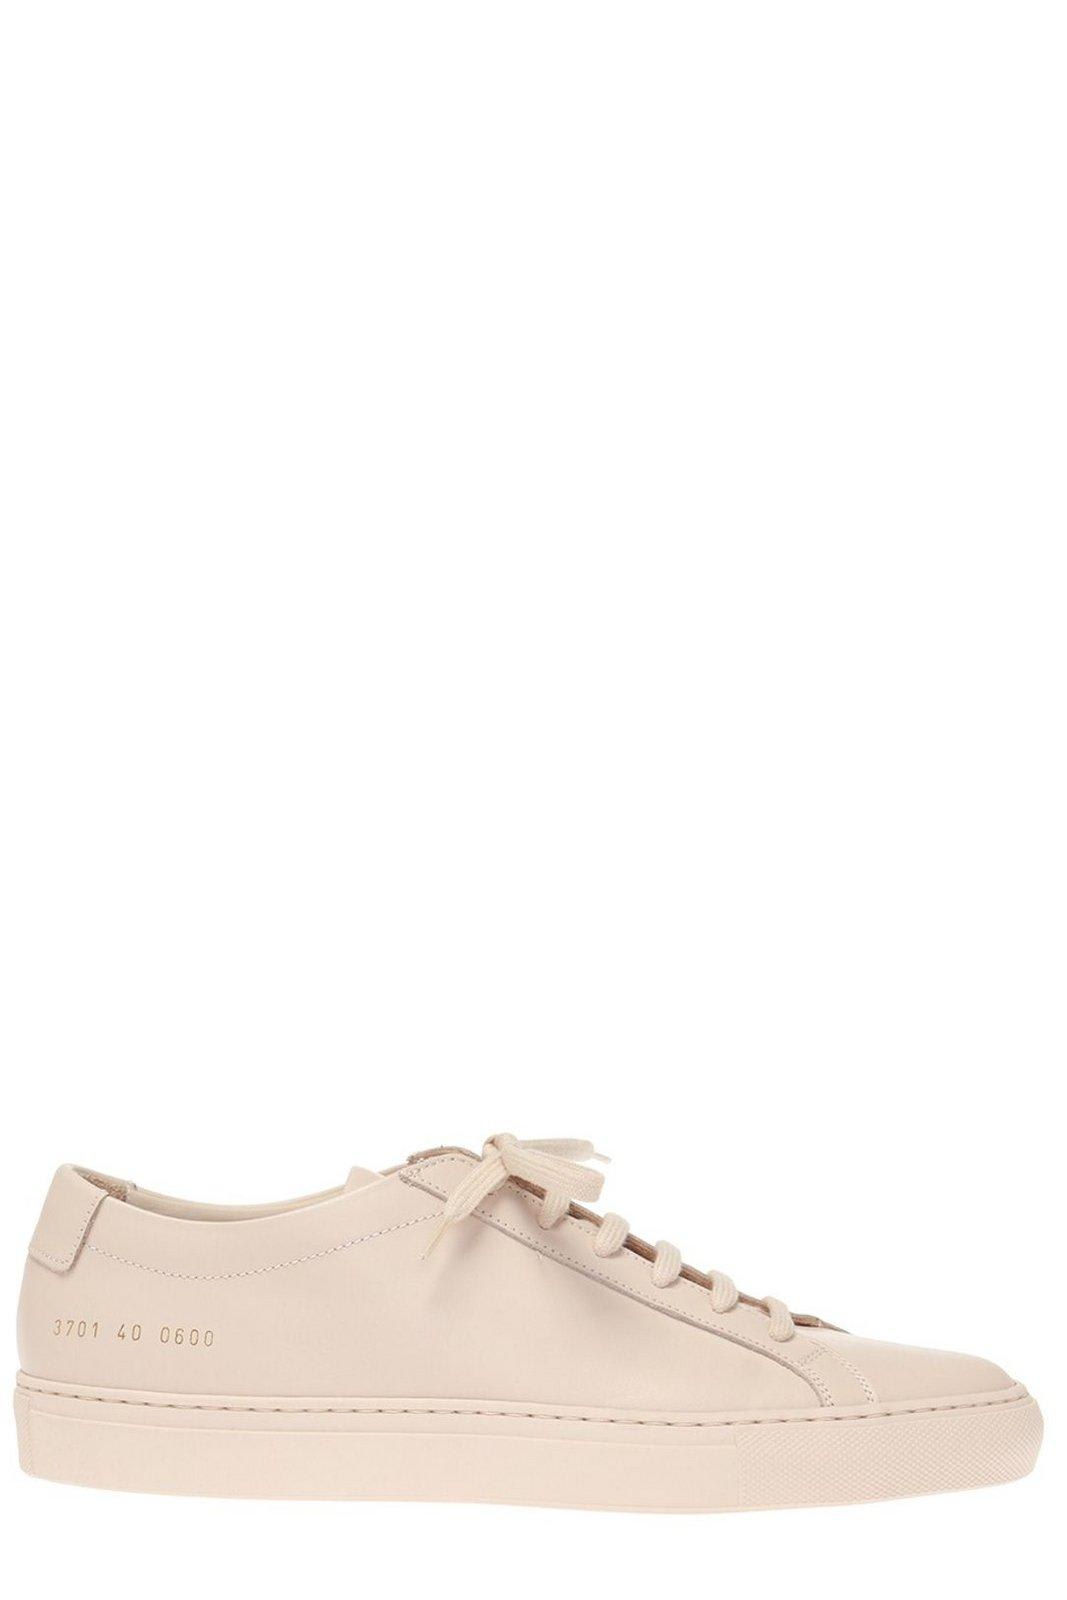 Shop Common Projects Original Achilles Sneakers In Powder